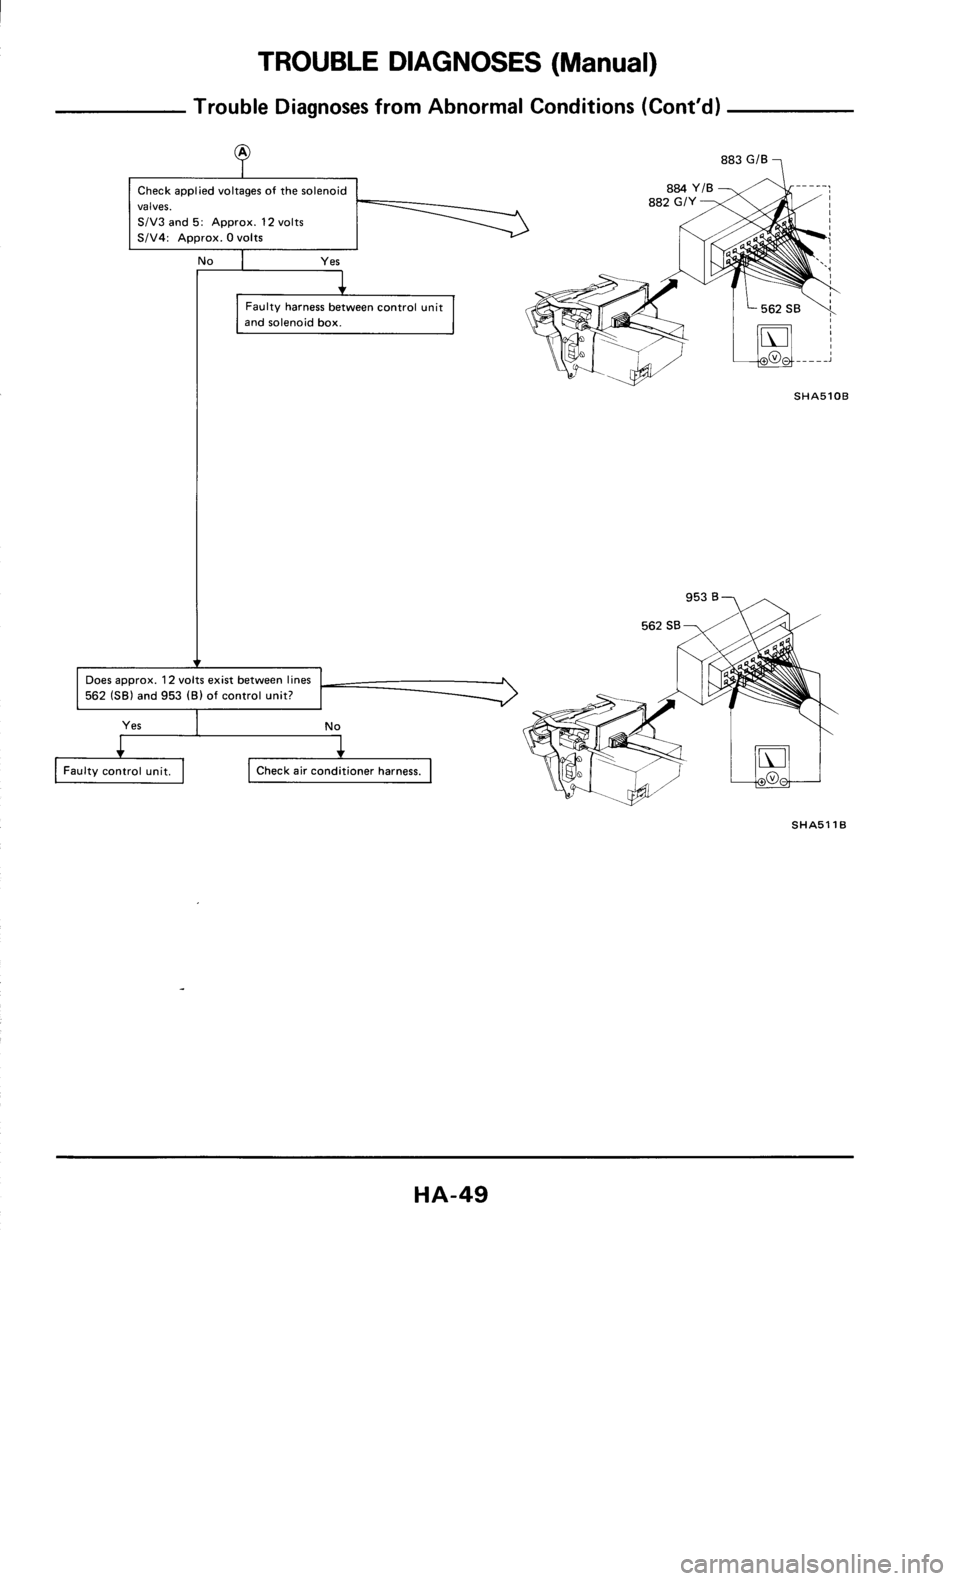 NISSAN 300ZX 1985 Z31 Heather And Air Conditioner Service Manual 